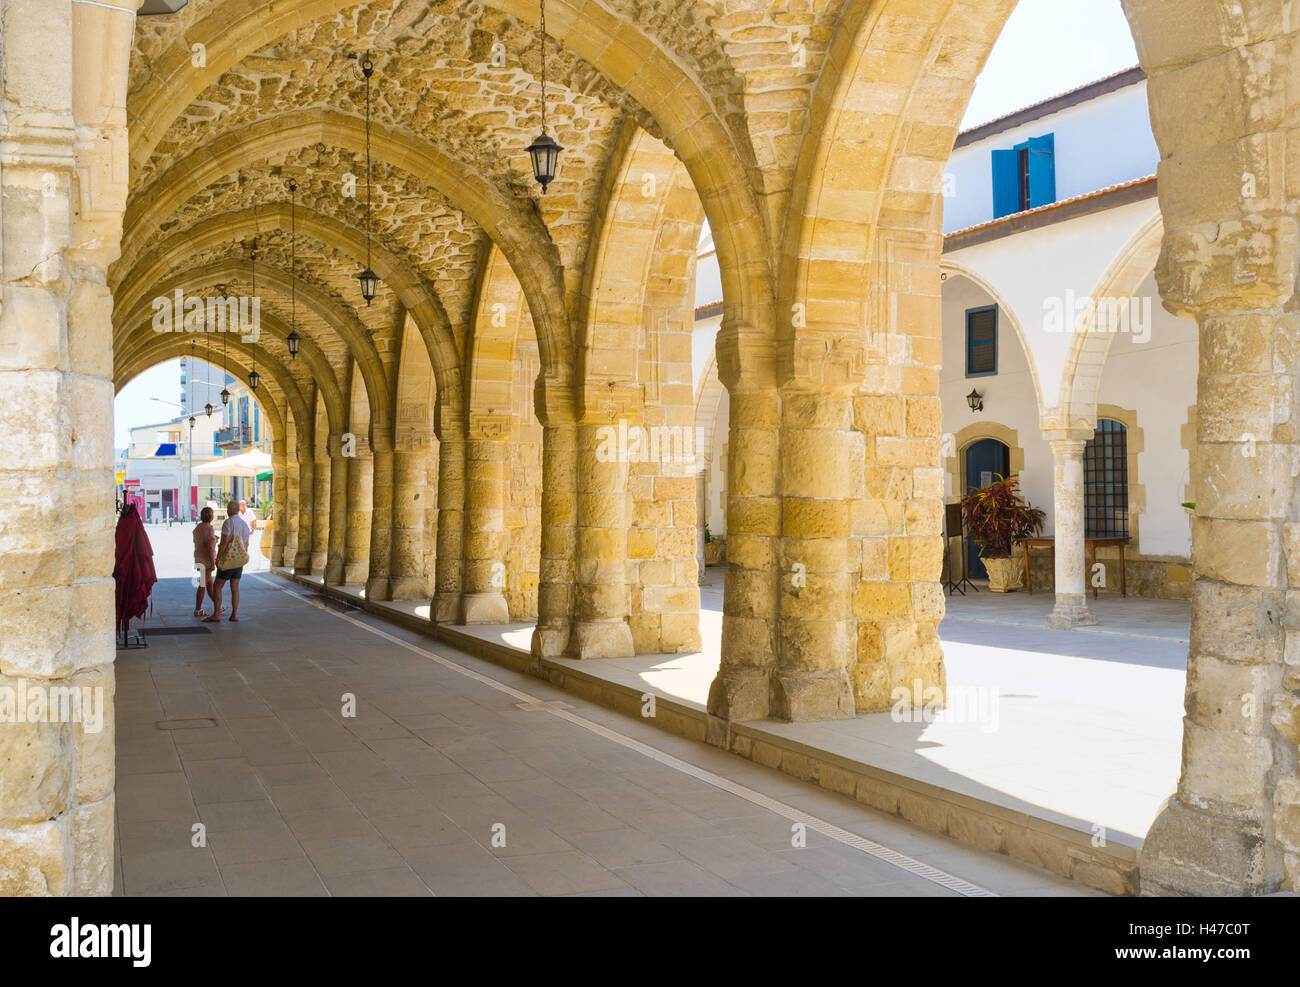 The old stone terrace of the St Lazarus church, Larnaca, Cyprus. Stock Photo